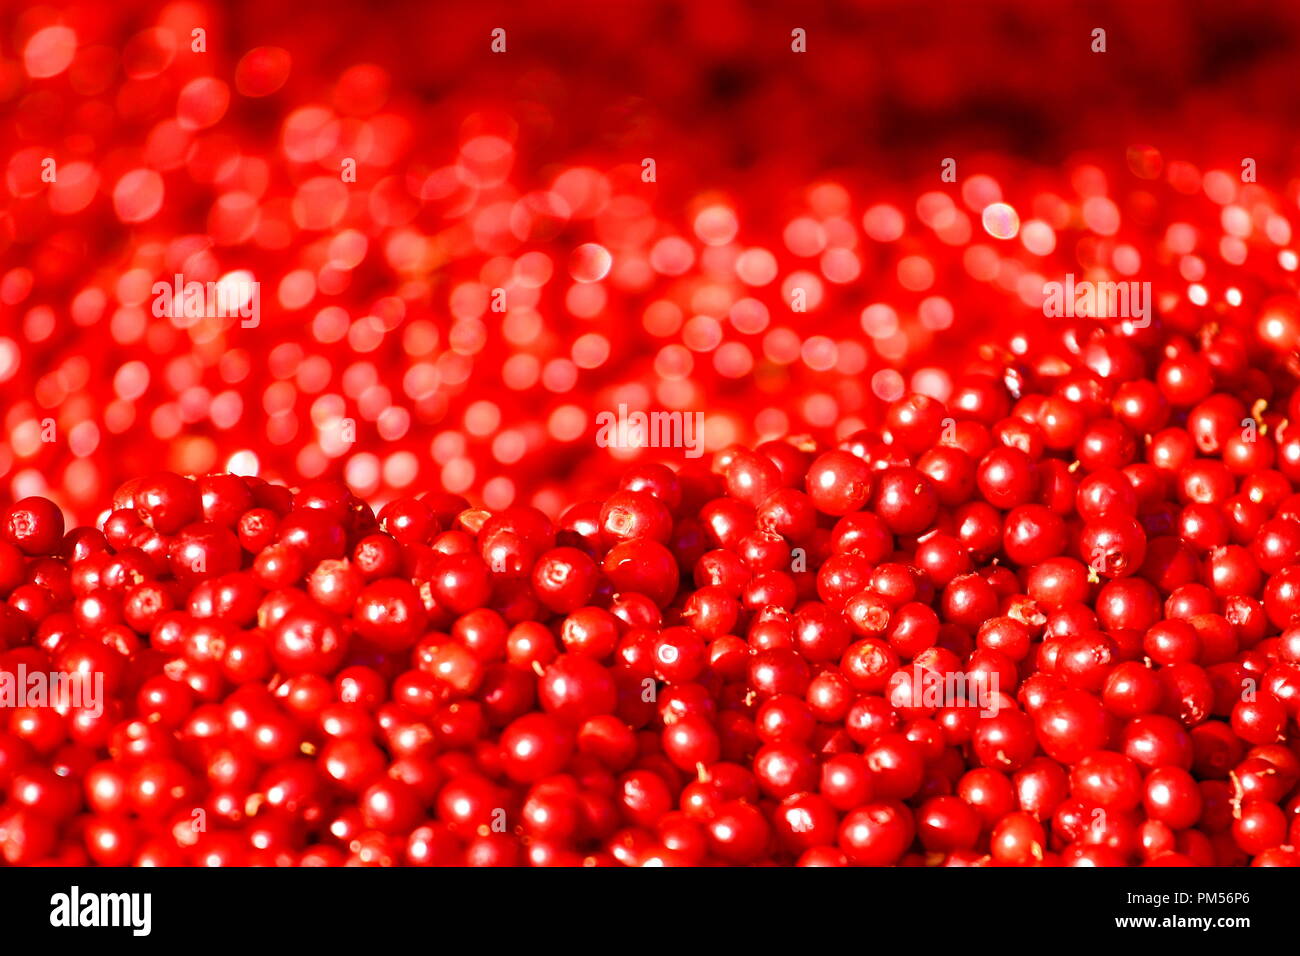 Cranberry red abstract Natura full frame Hintergrund Stockfoto